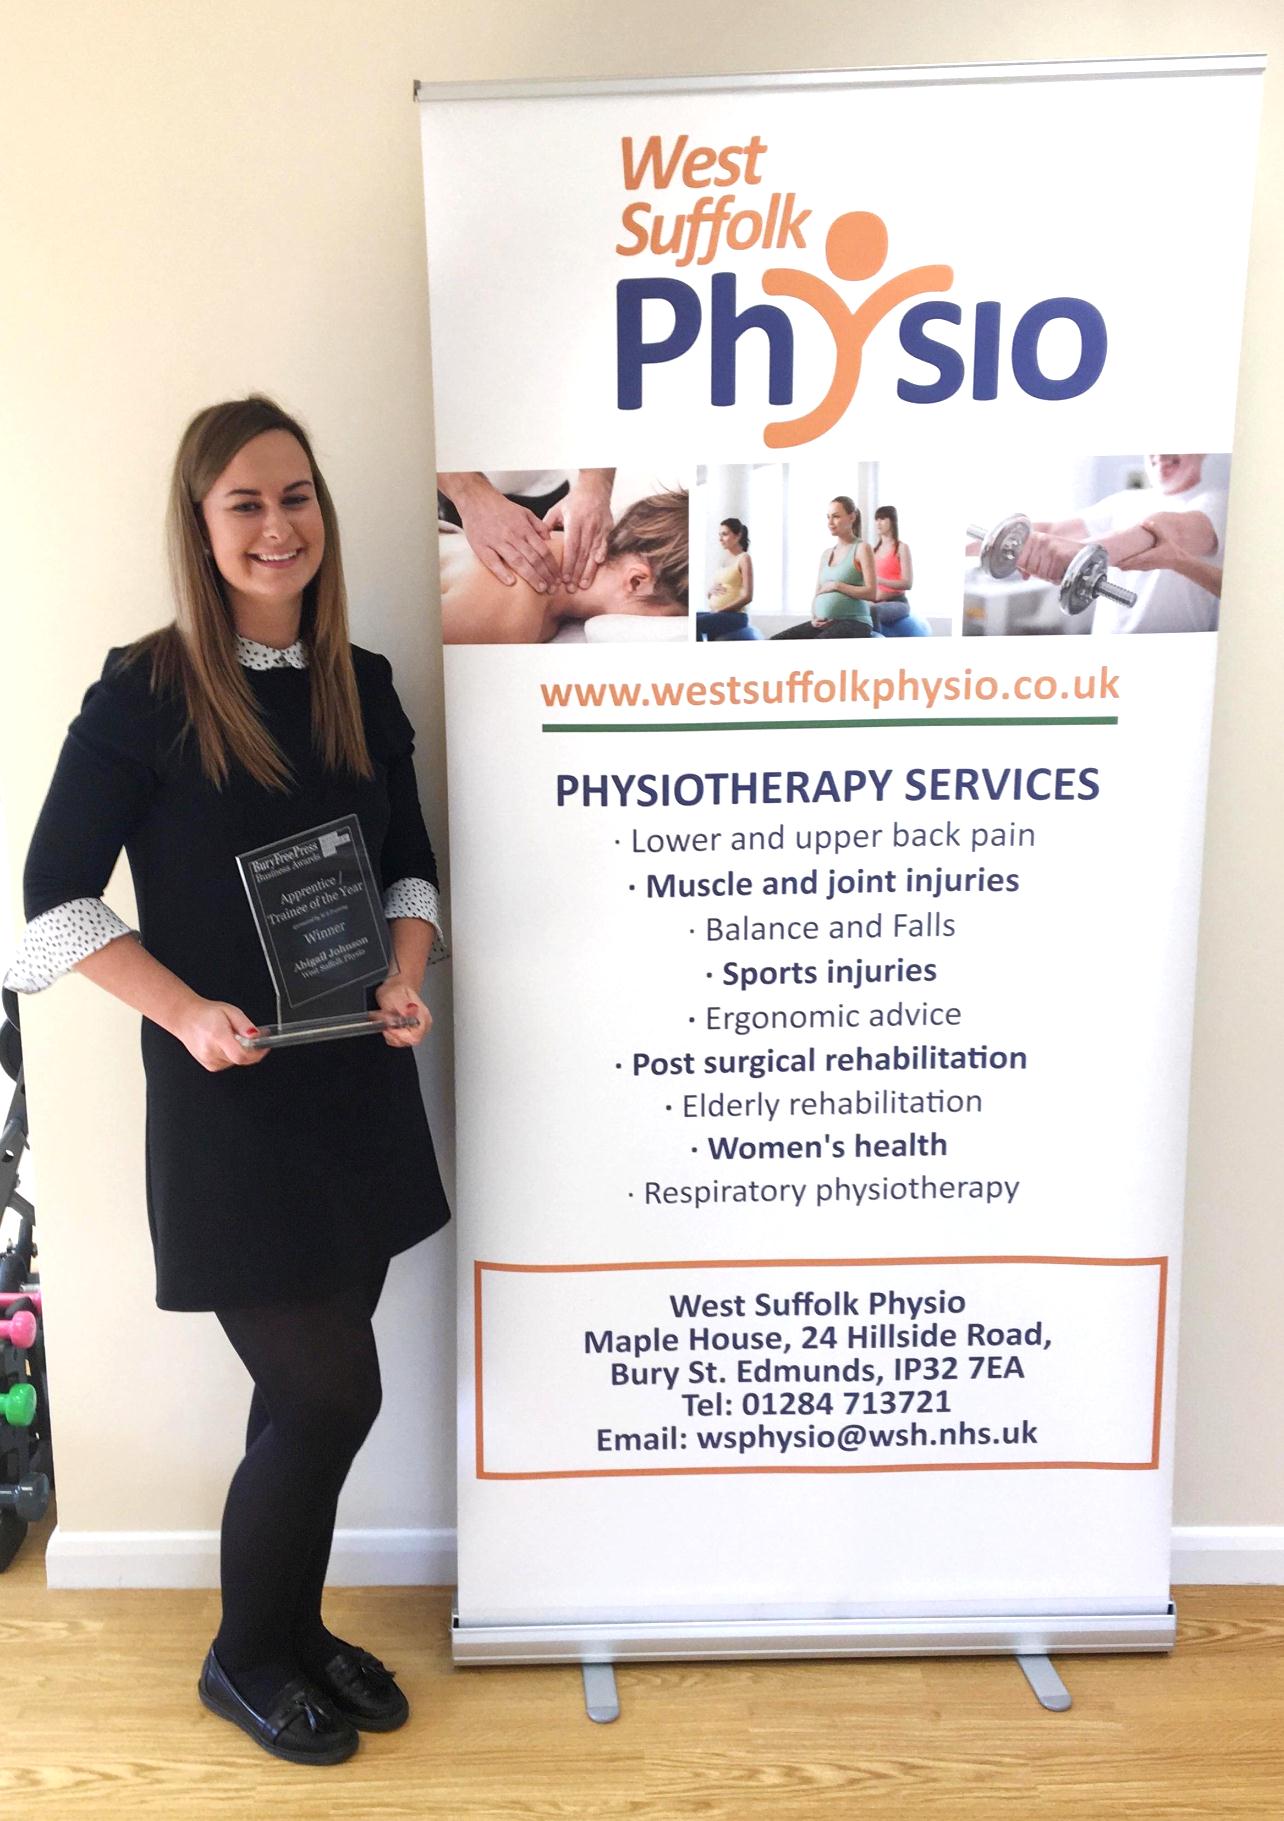 Abigail Johnson, clinic administrator for West Suffolk Physio